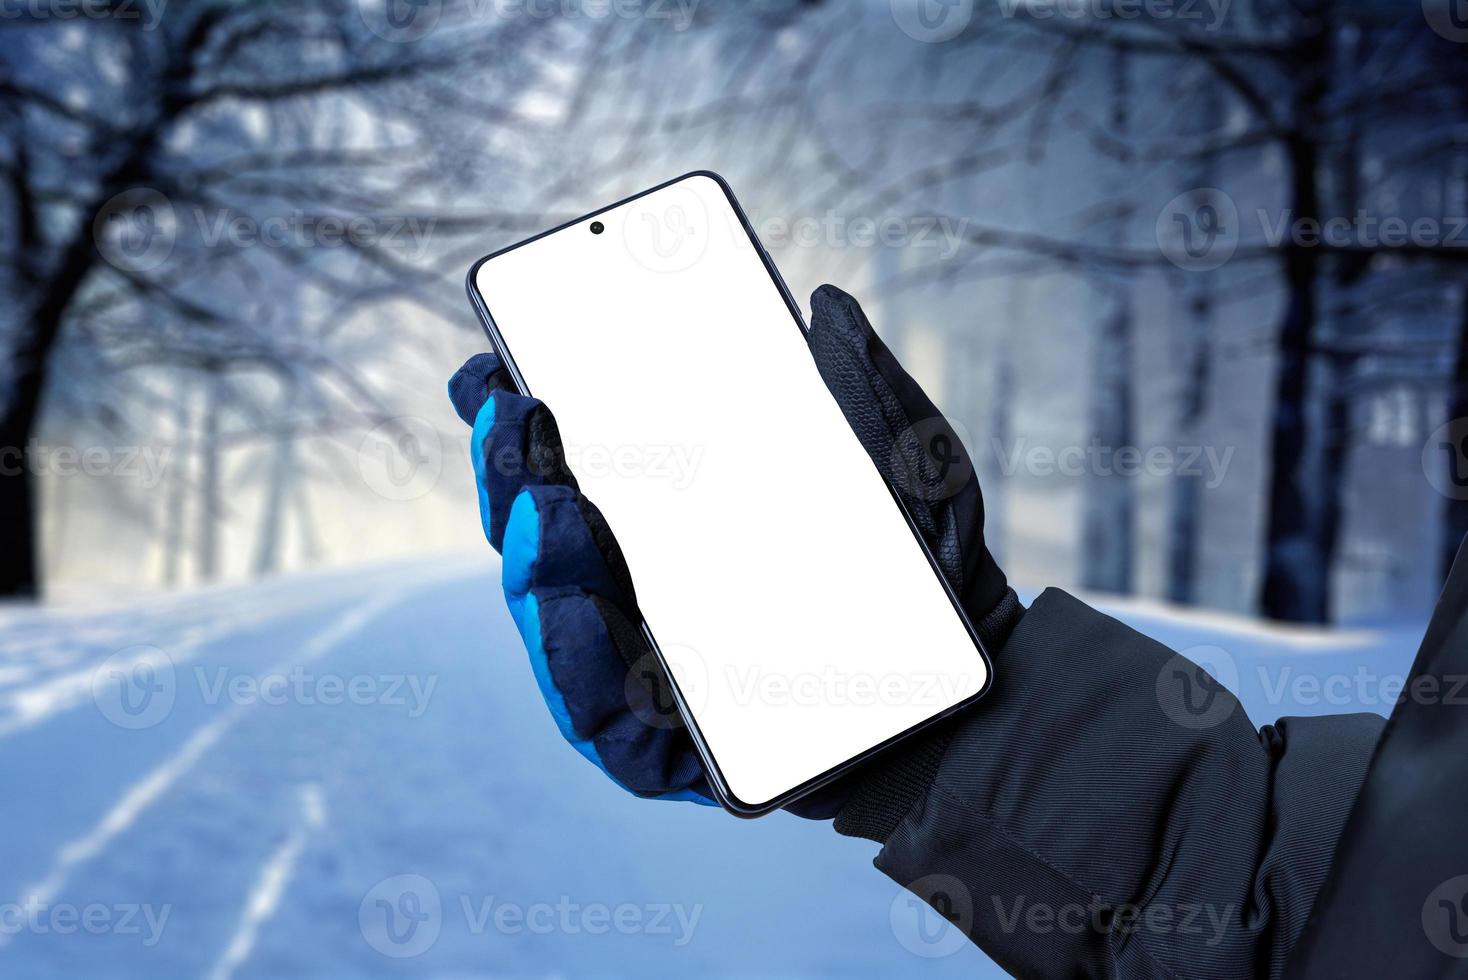 Mobile phone in hand with winter glove. Trees covered with snow in background. Isolated display for app promotion photo